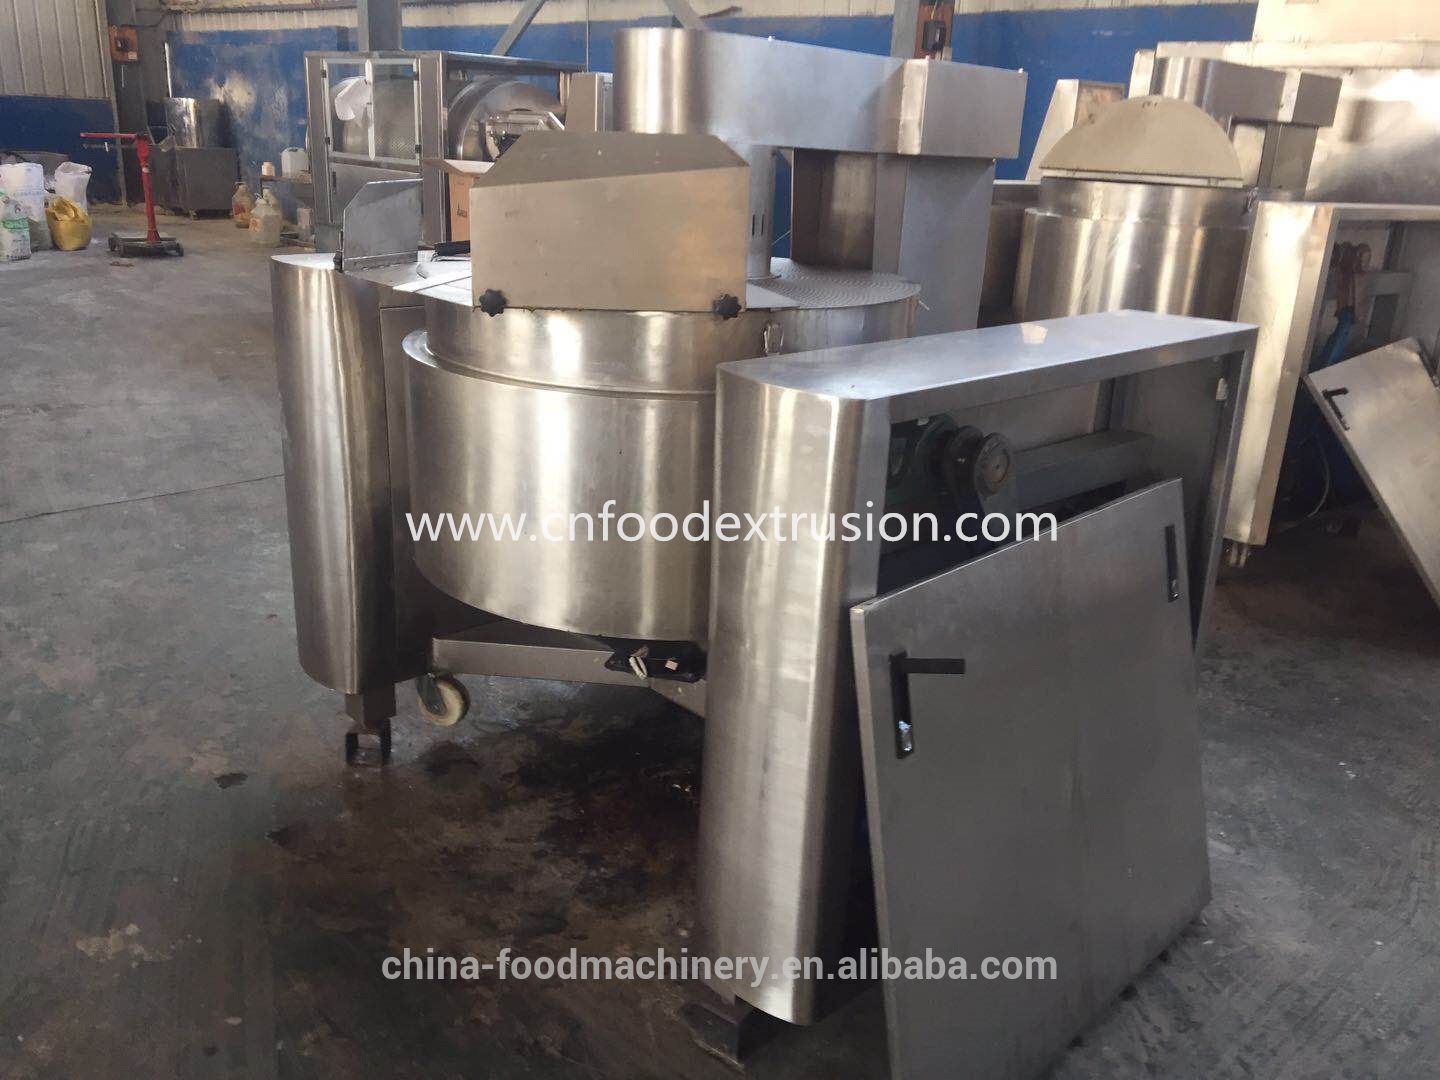 Hot Selling full automatic China popcorn machine with price 